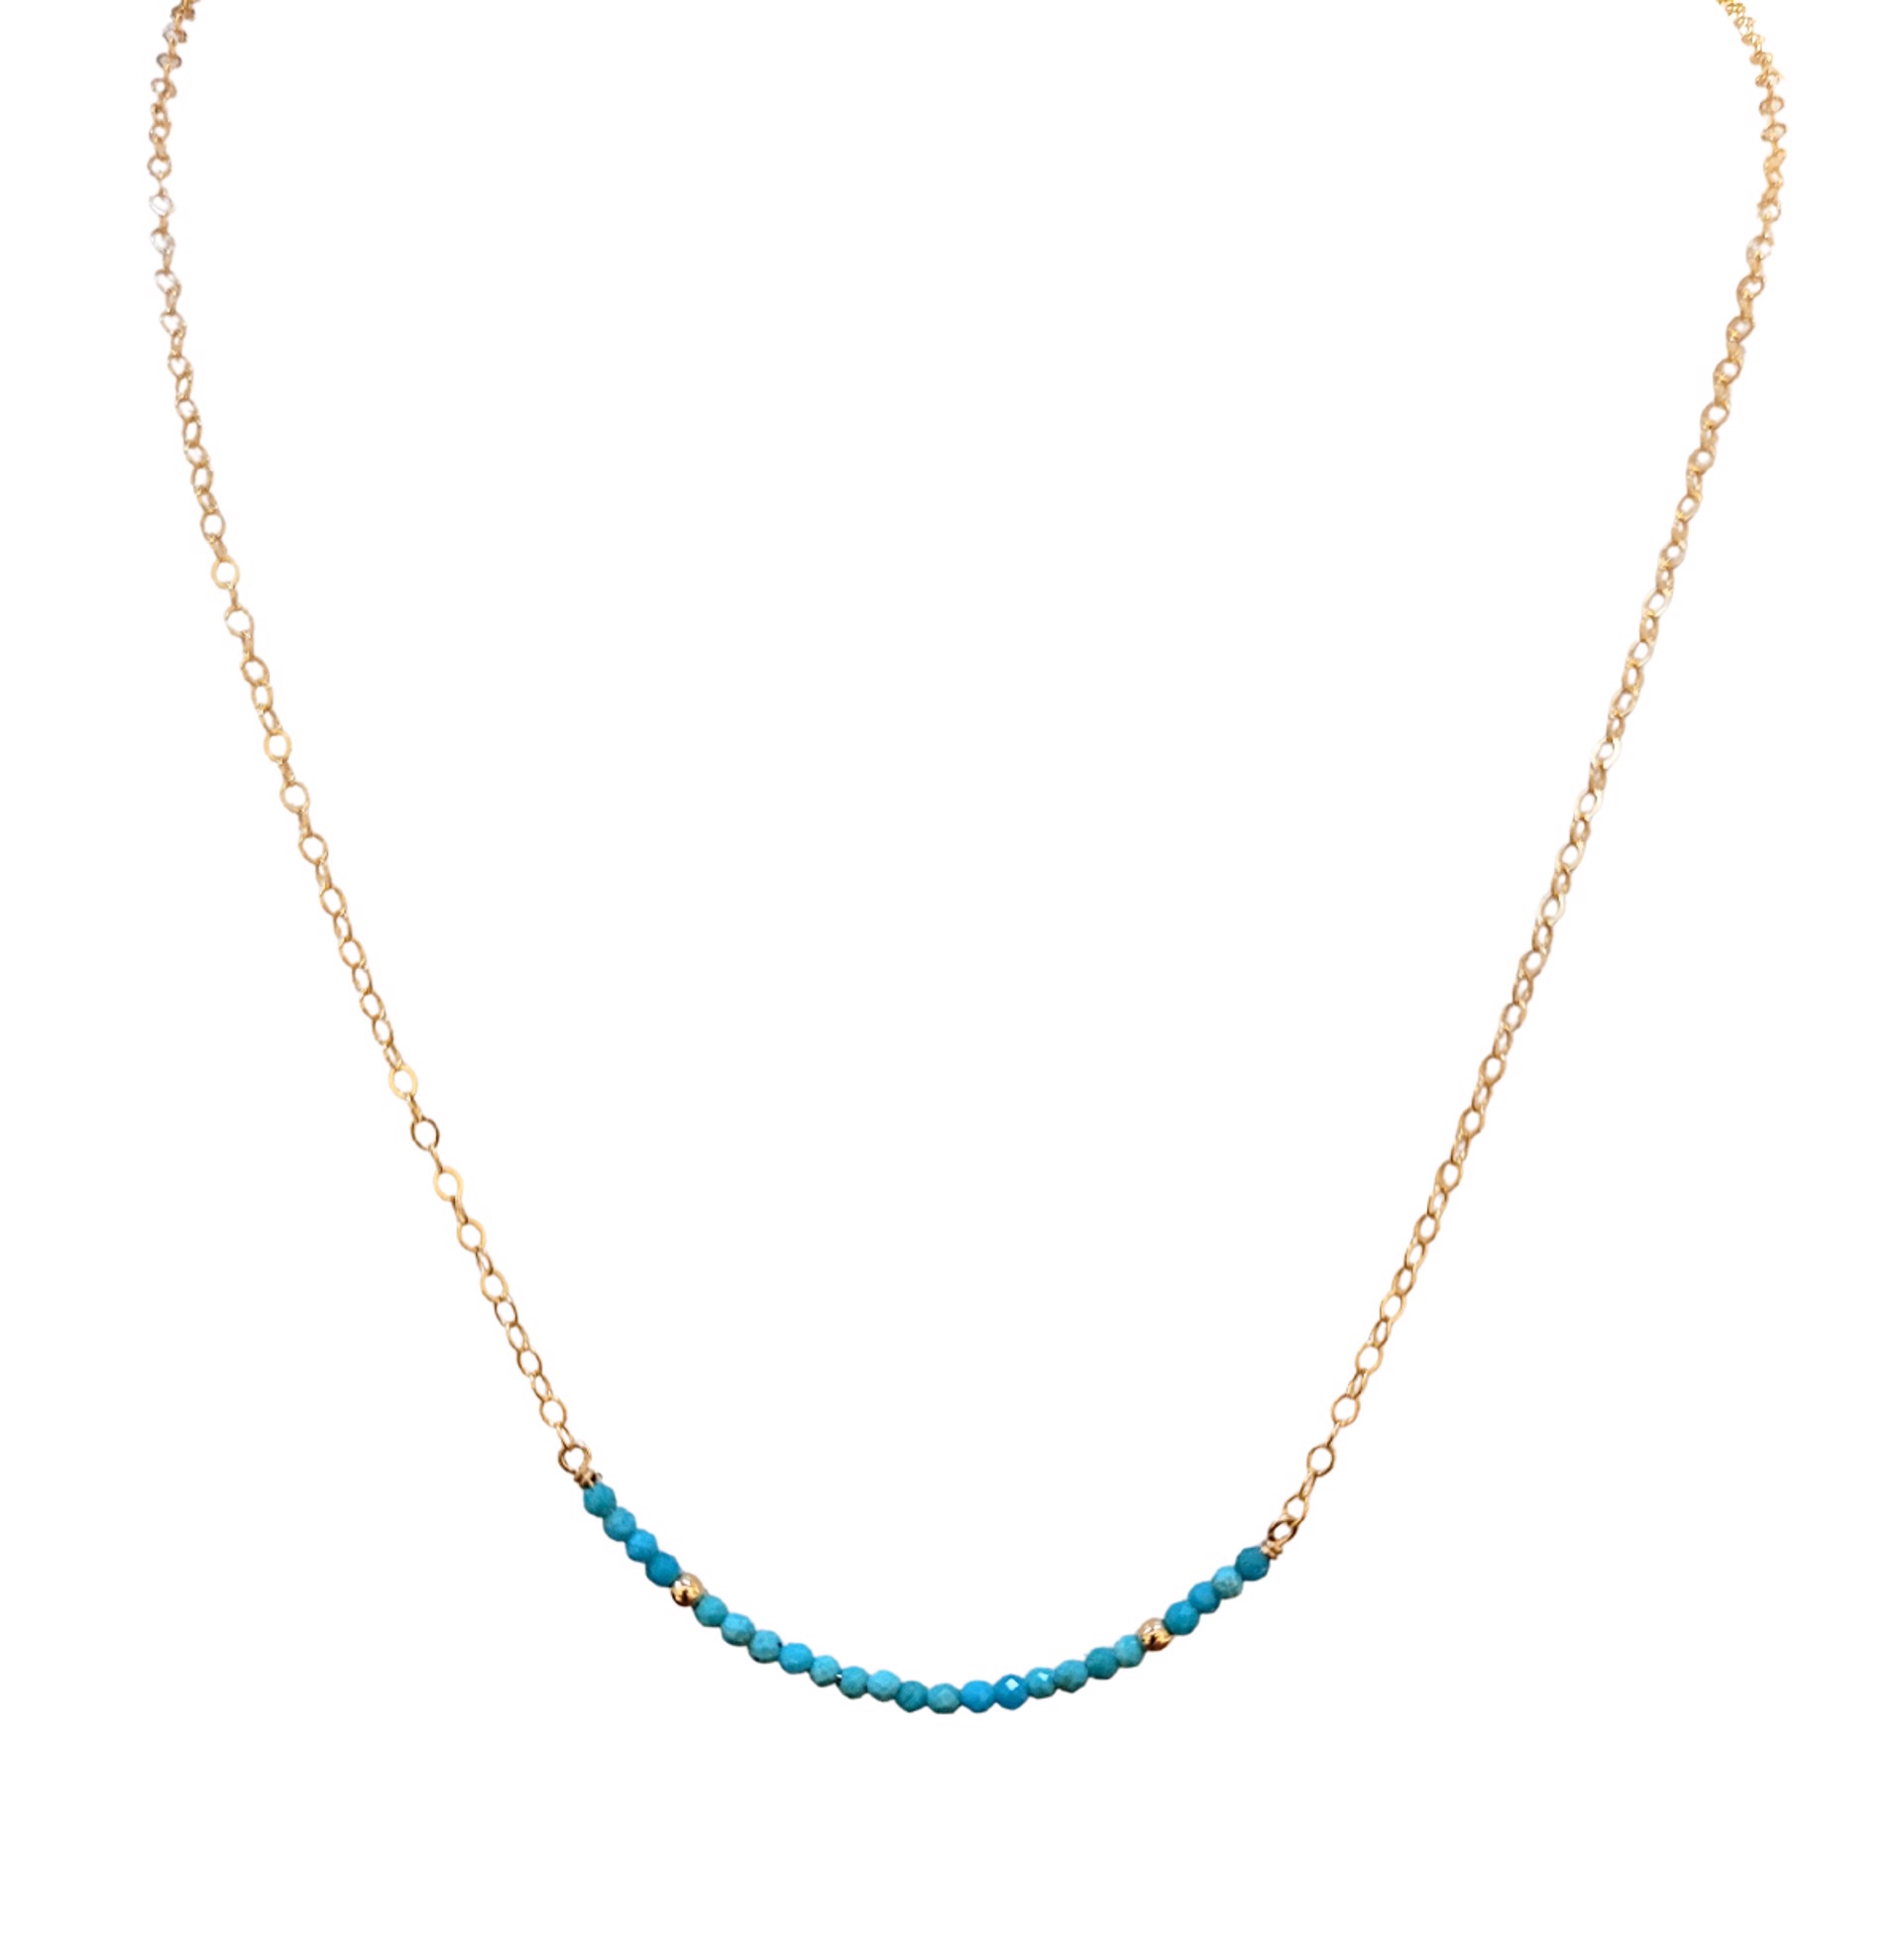 Necklace -  Sleeping Beauty Turquoise Bar 14K Gold Filled by Julia Balestracci